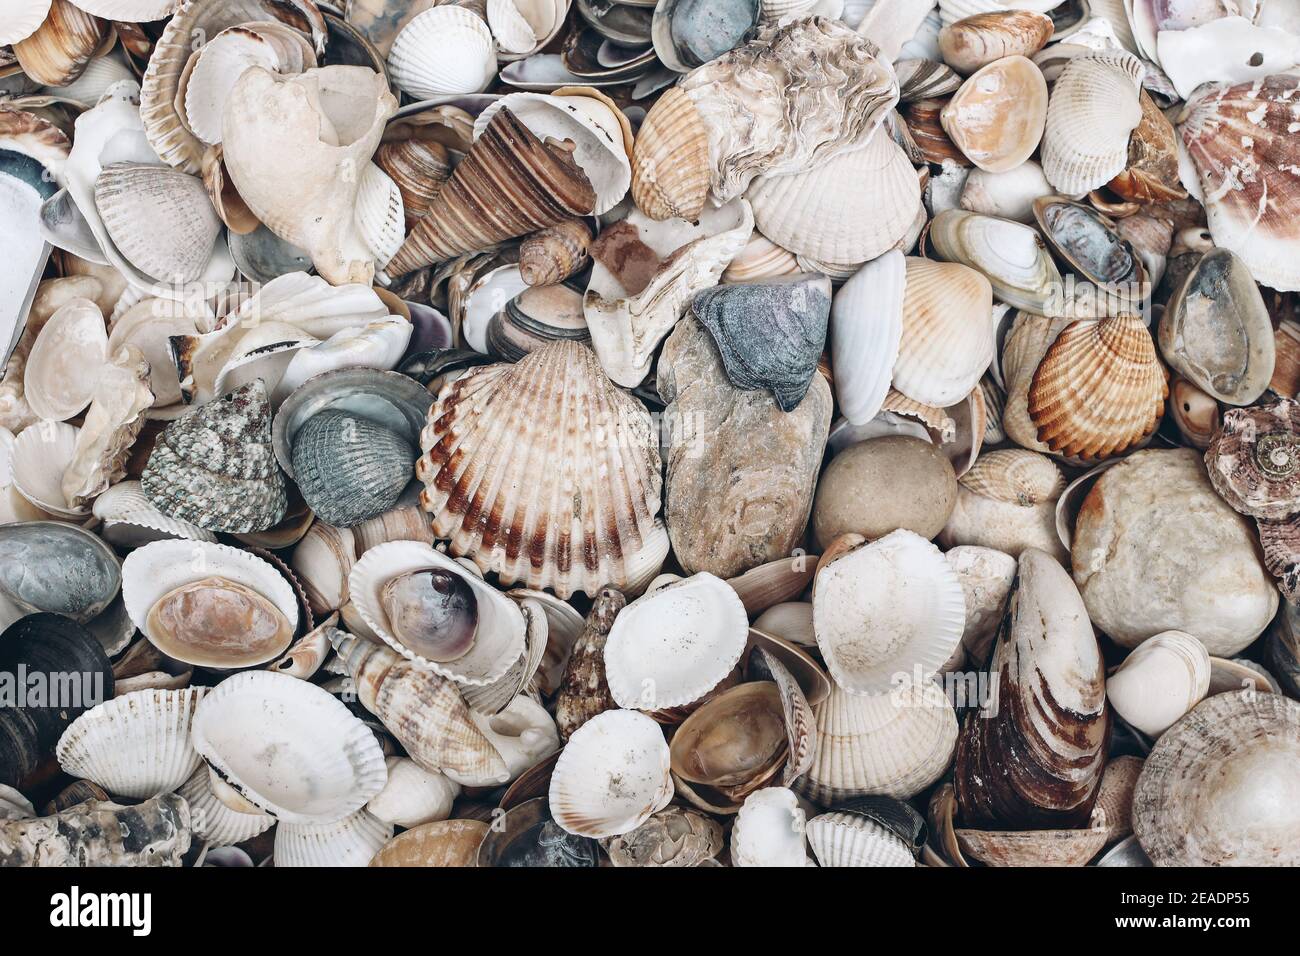 Closeup of various colorful sea shells on beach. Ocean, seashore natural textured background. Summer vacation concept. Flat lay, top view. No people. Stock Photo